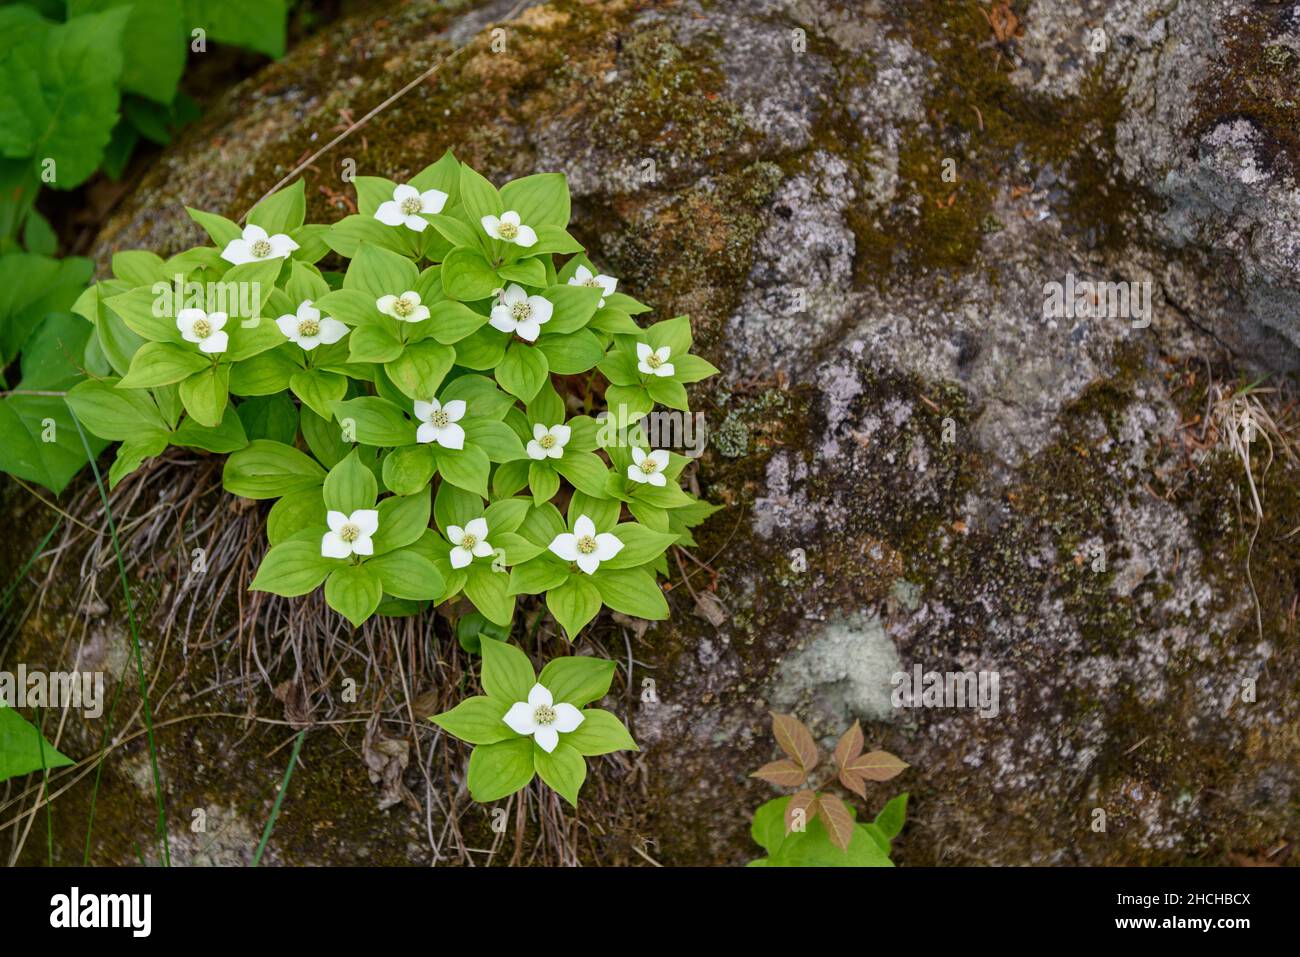 Small white flowers growing Stock Photo